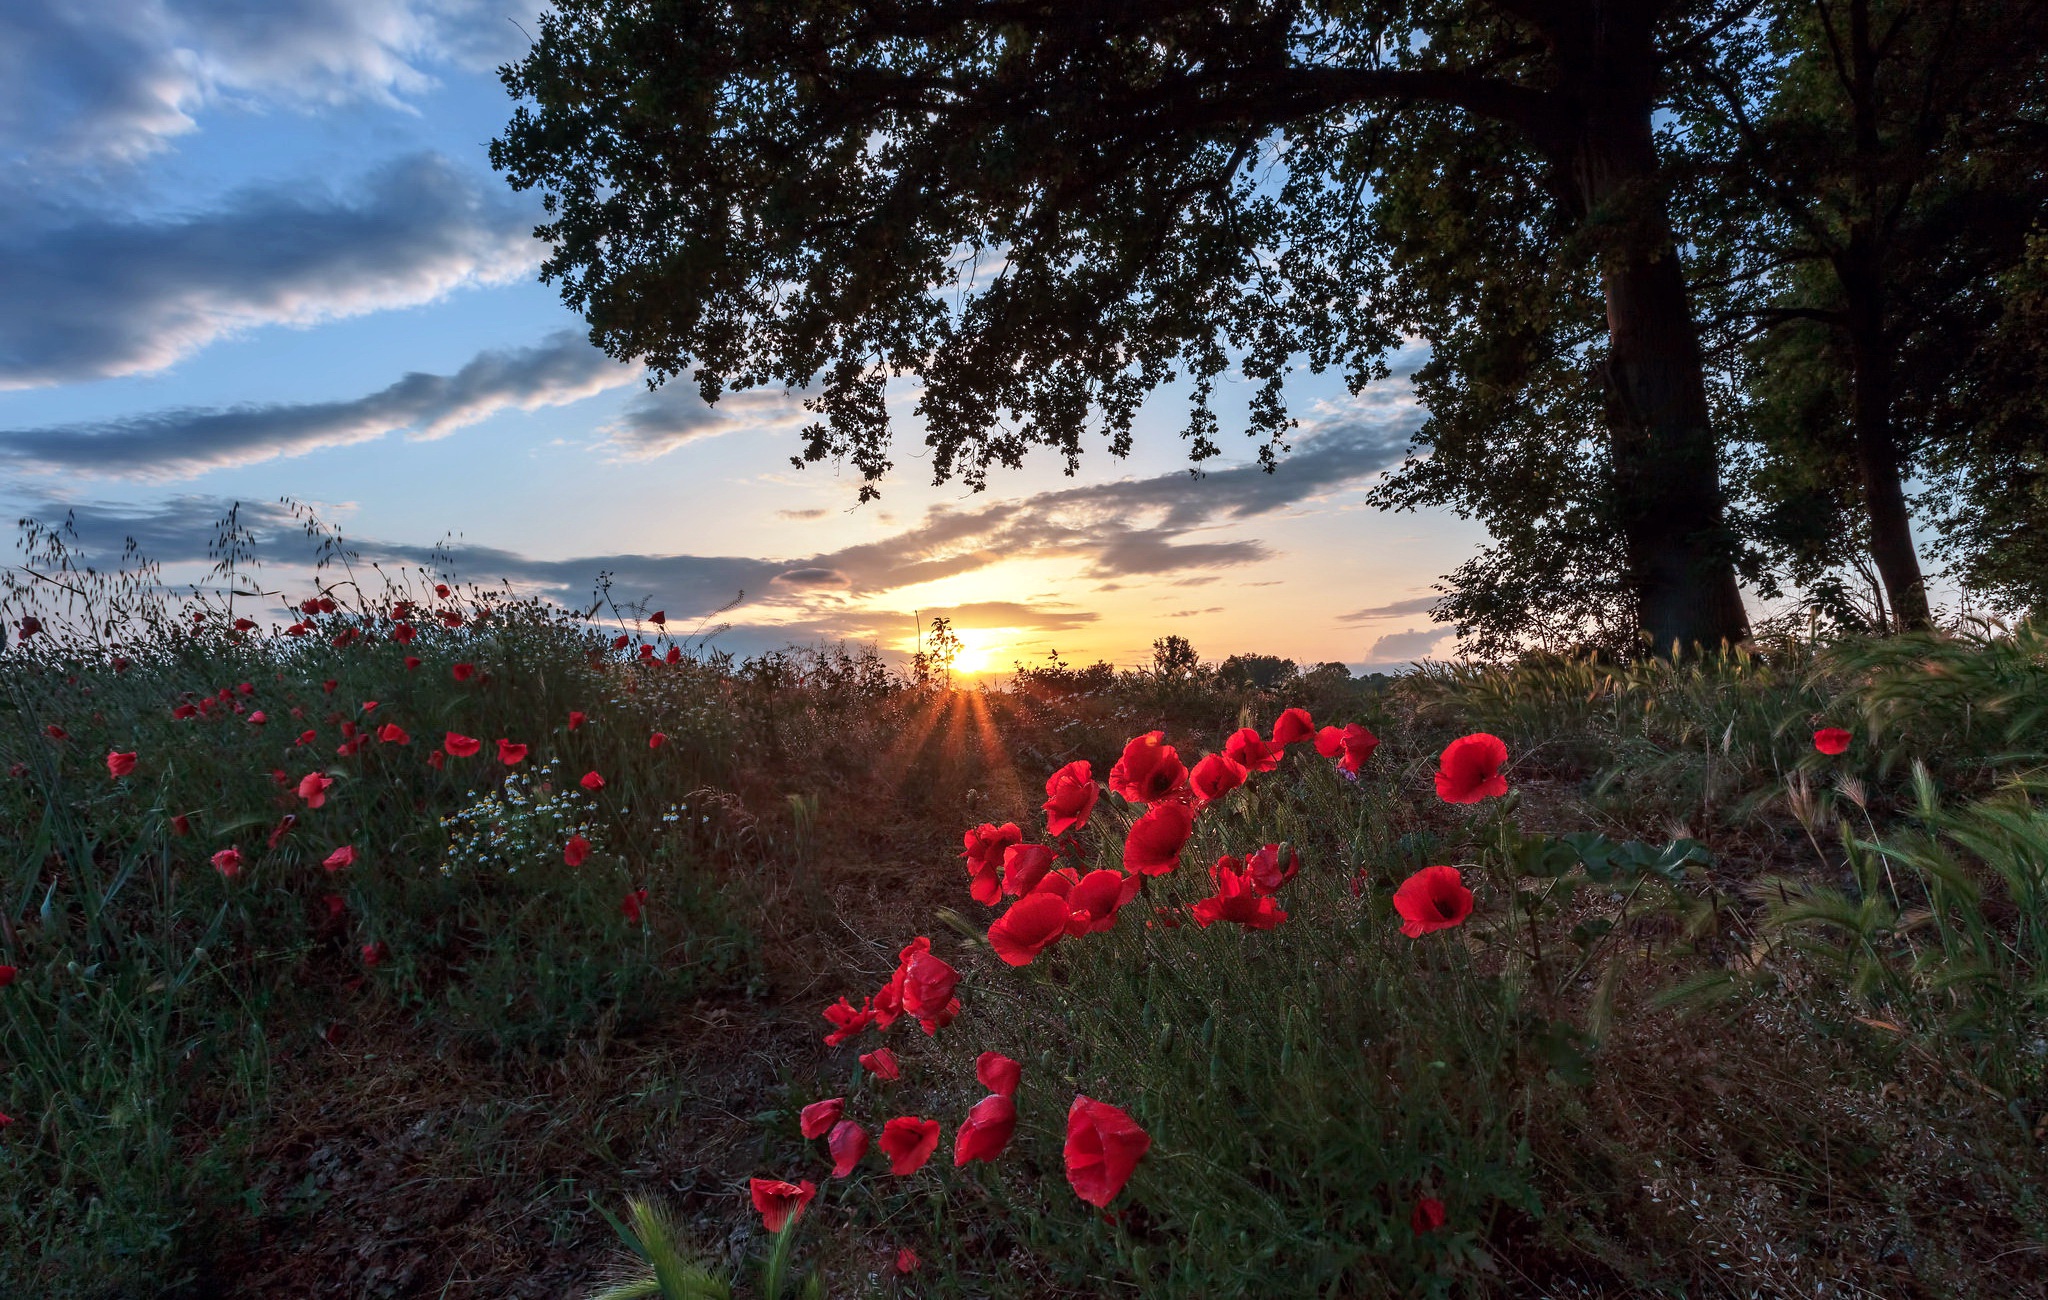 General 2048x1300 nature plants flowers red flowers outdoors poppies